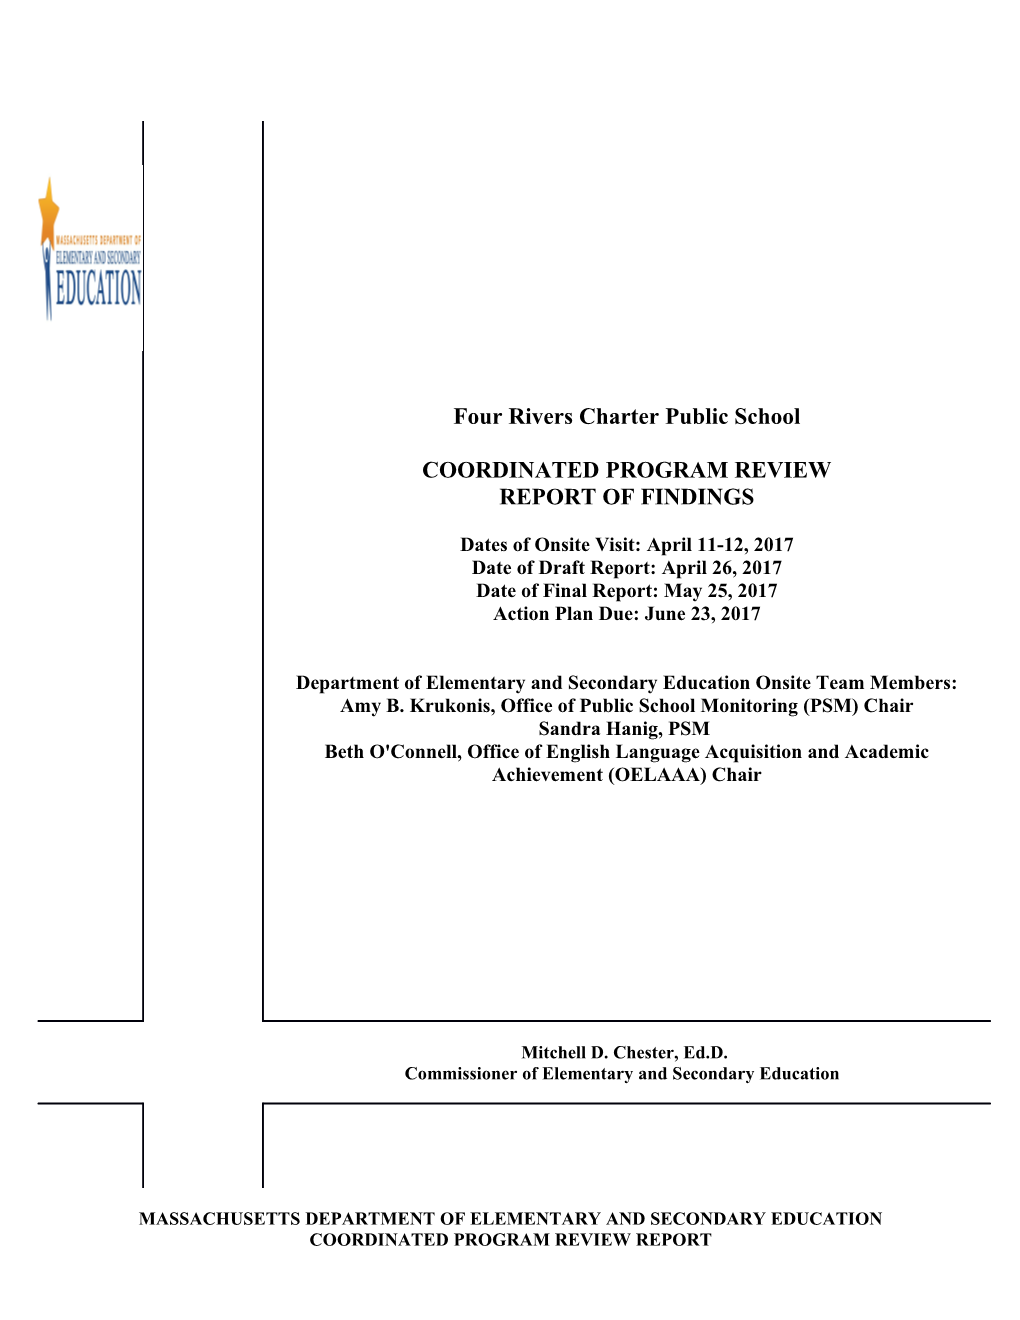 Four Rivers Charter School CPR Final Report 2017